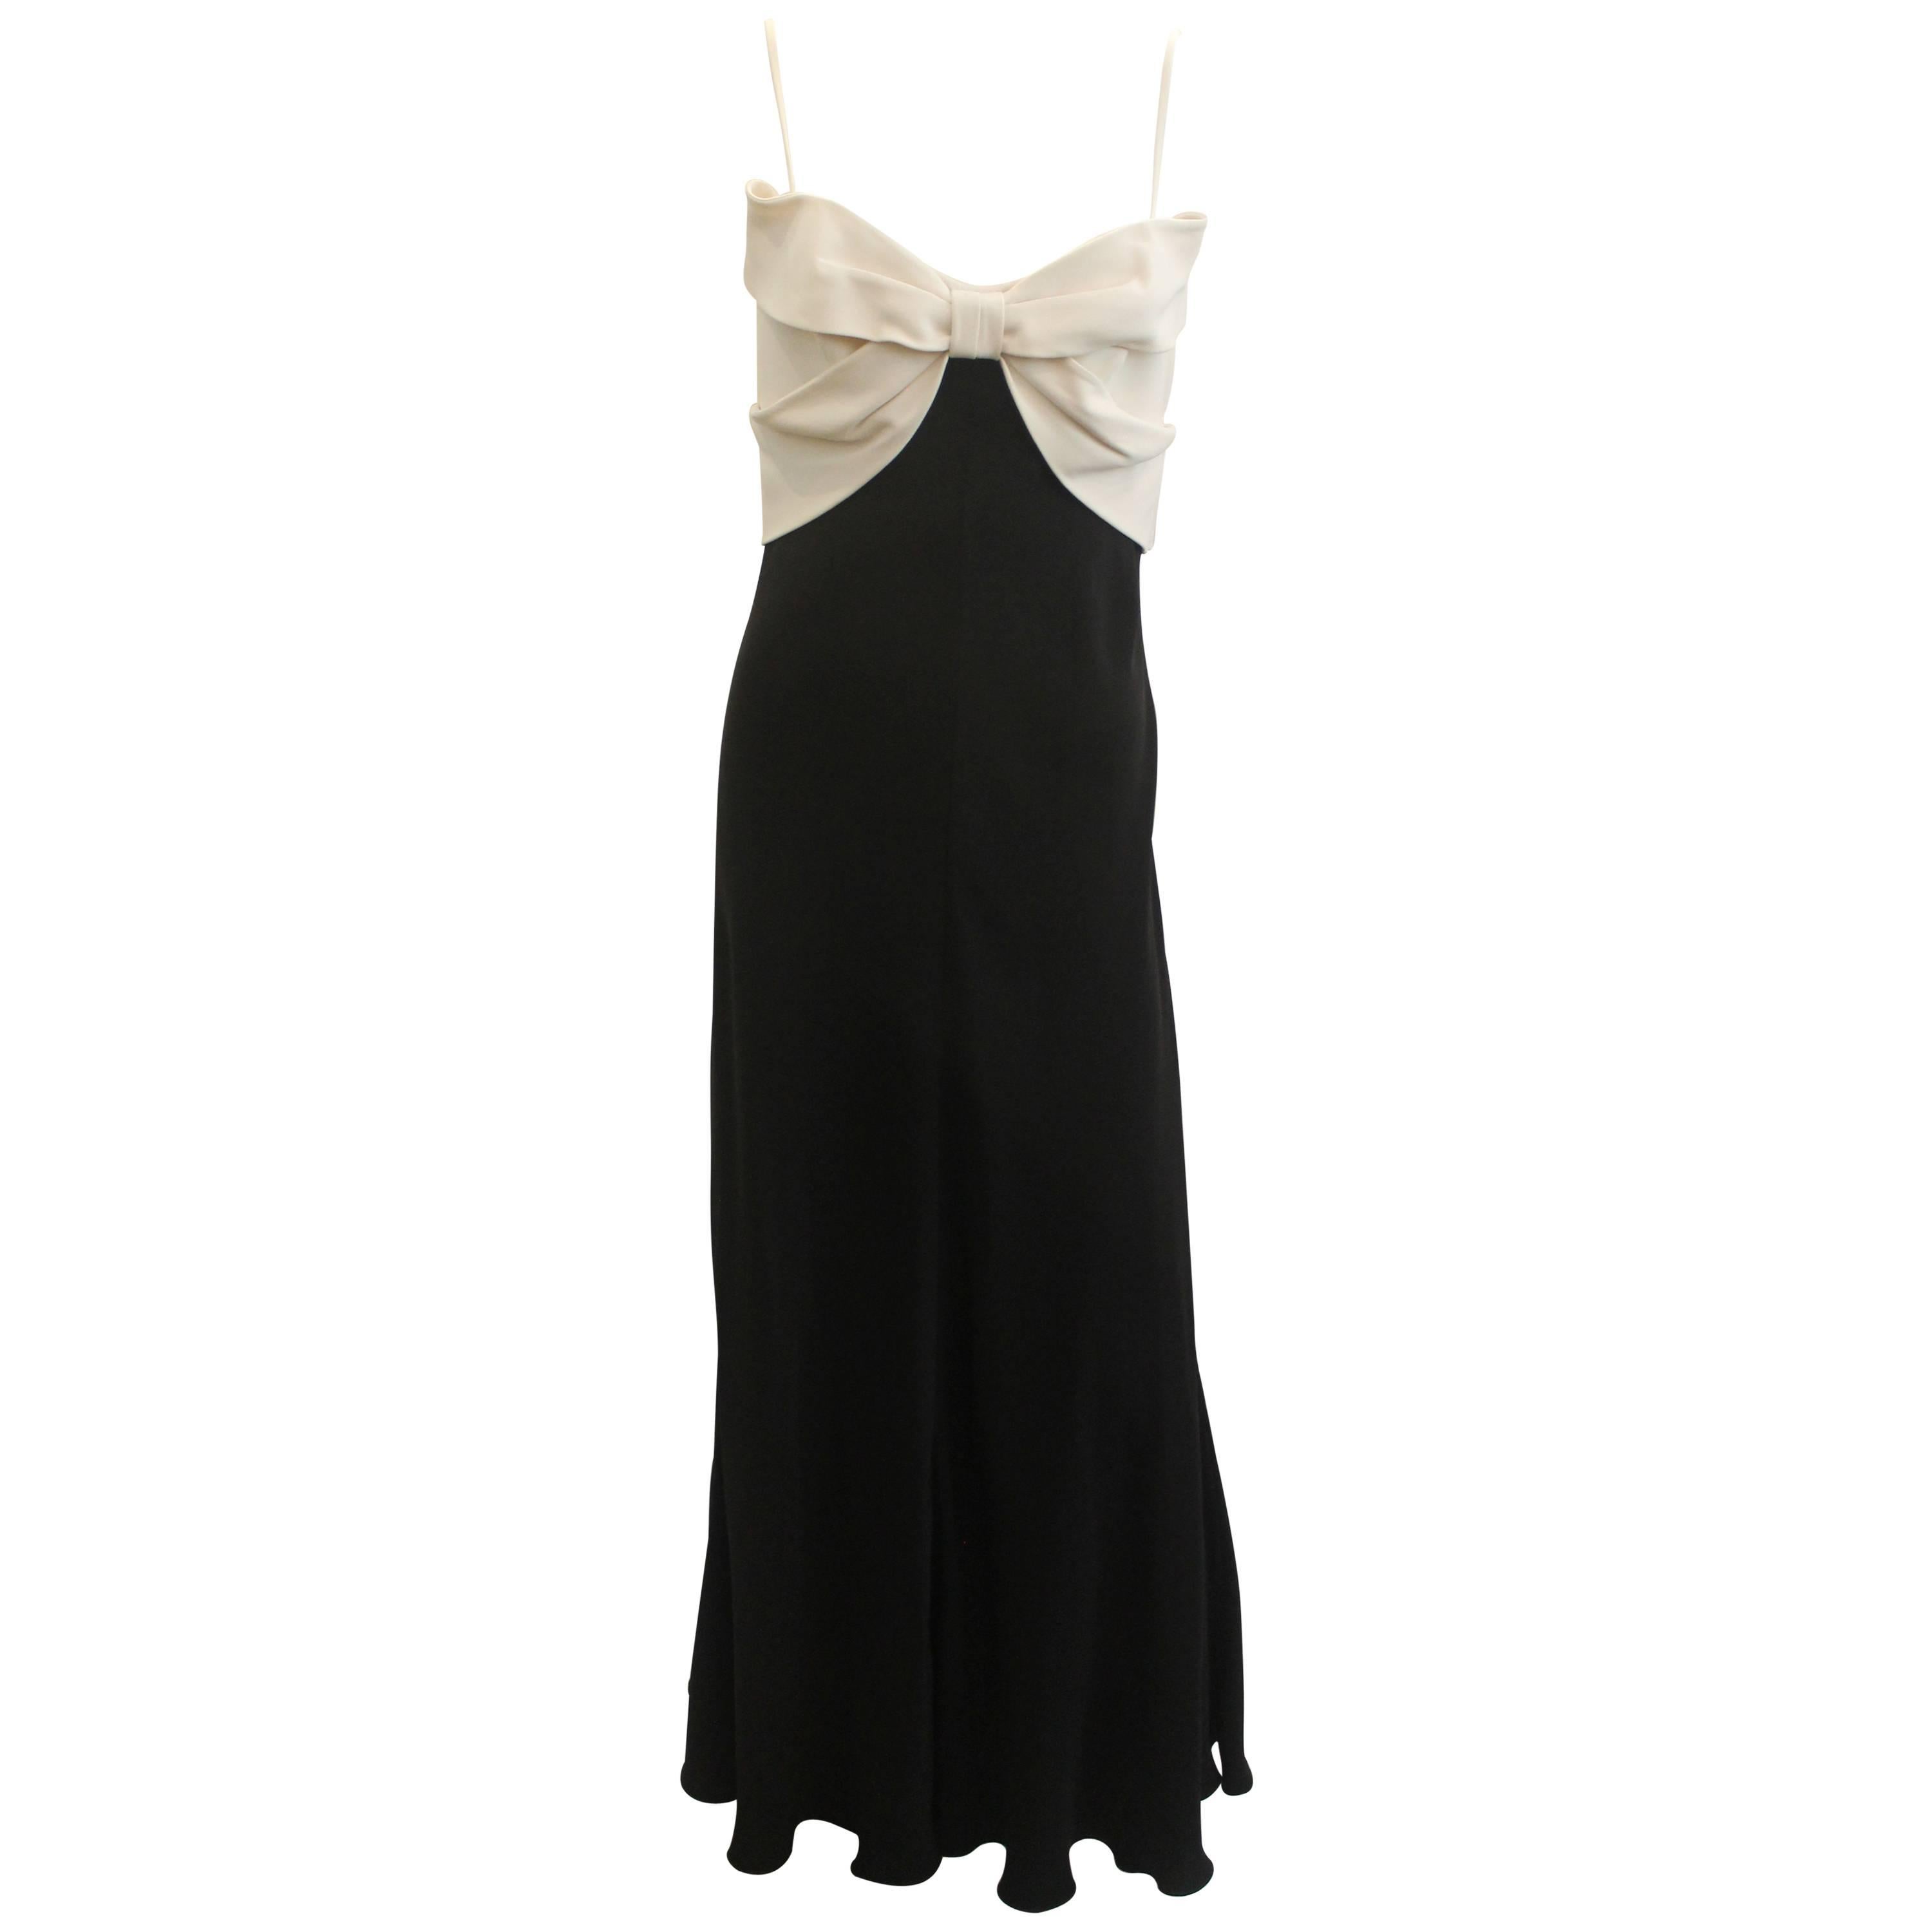 Valentino Ivory & Black Bow Bodice Gown - 8